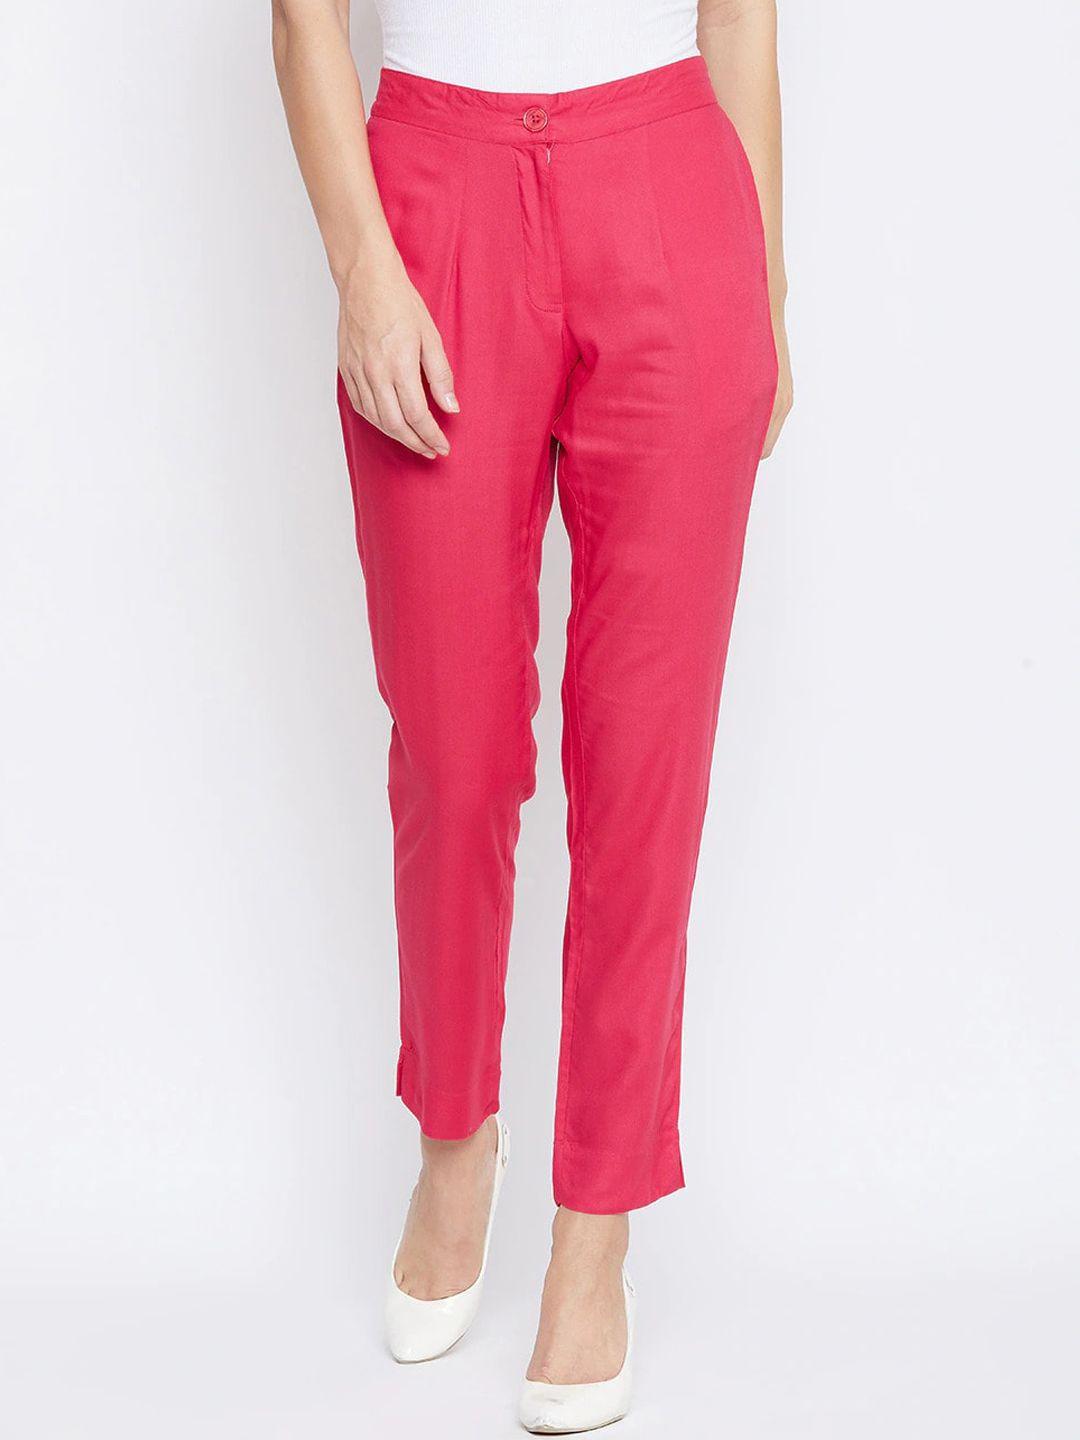 fabglobal women relaxed slim fit easy wash trousers